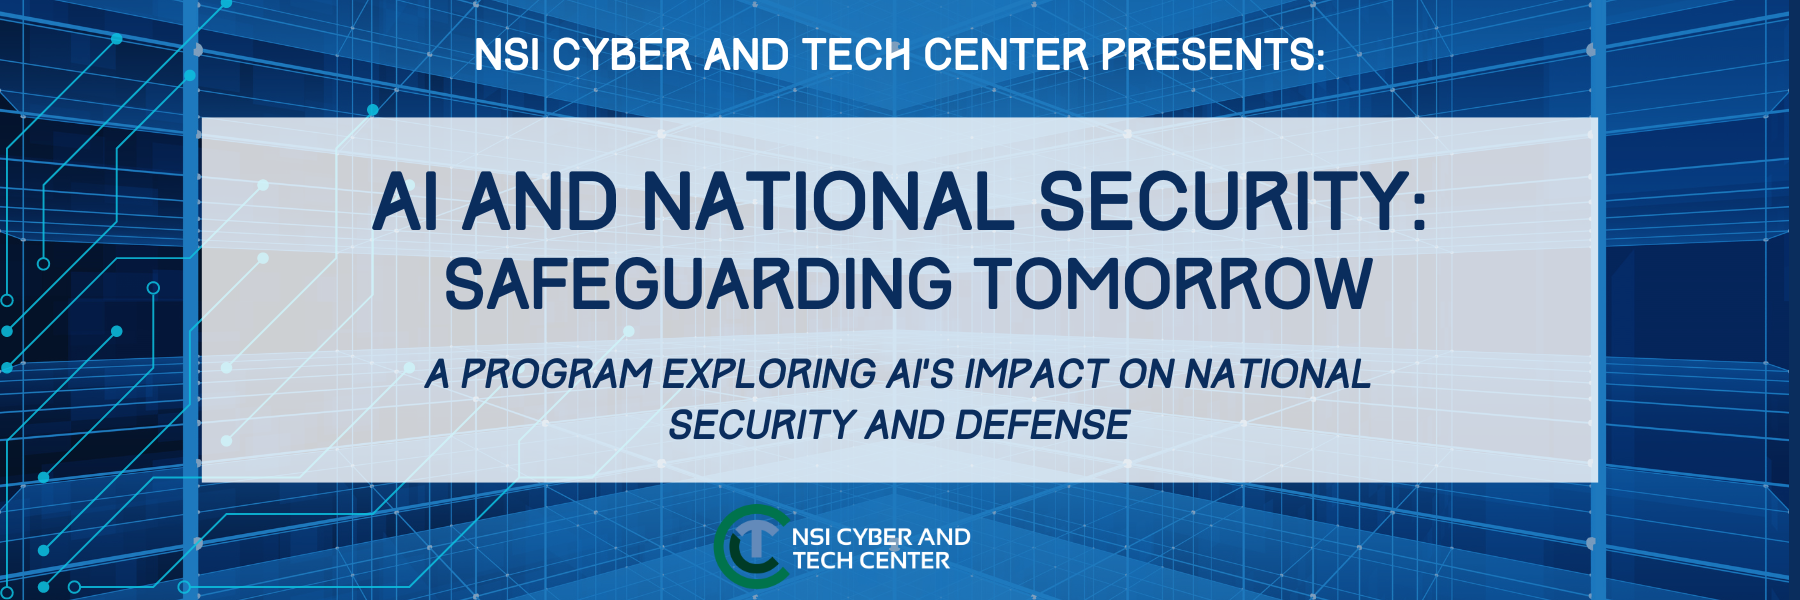 AI and National Security: Safeguarding Tomorrow - A Roundtable Series